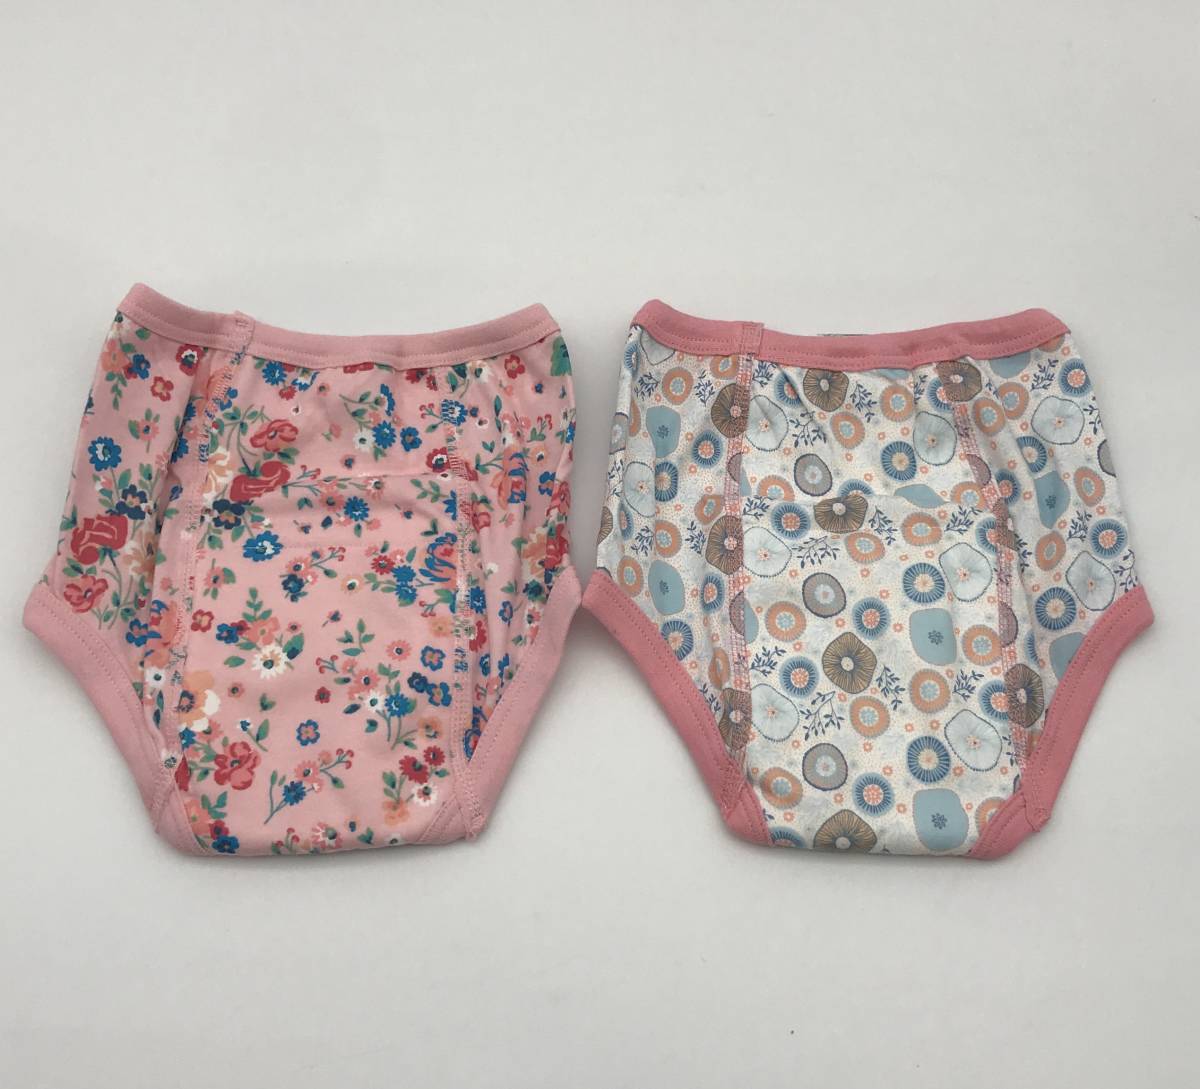 #54_0054 [MooMoo Baby] training pants 8 sheets set cotton 6 layer child toilet unisex baby 4T(110) 8 pattern floral print star Heart 